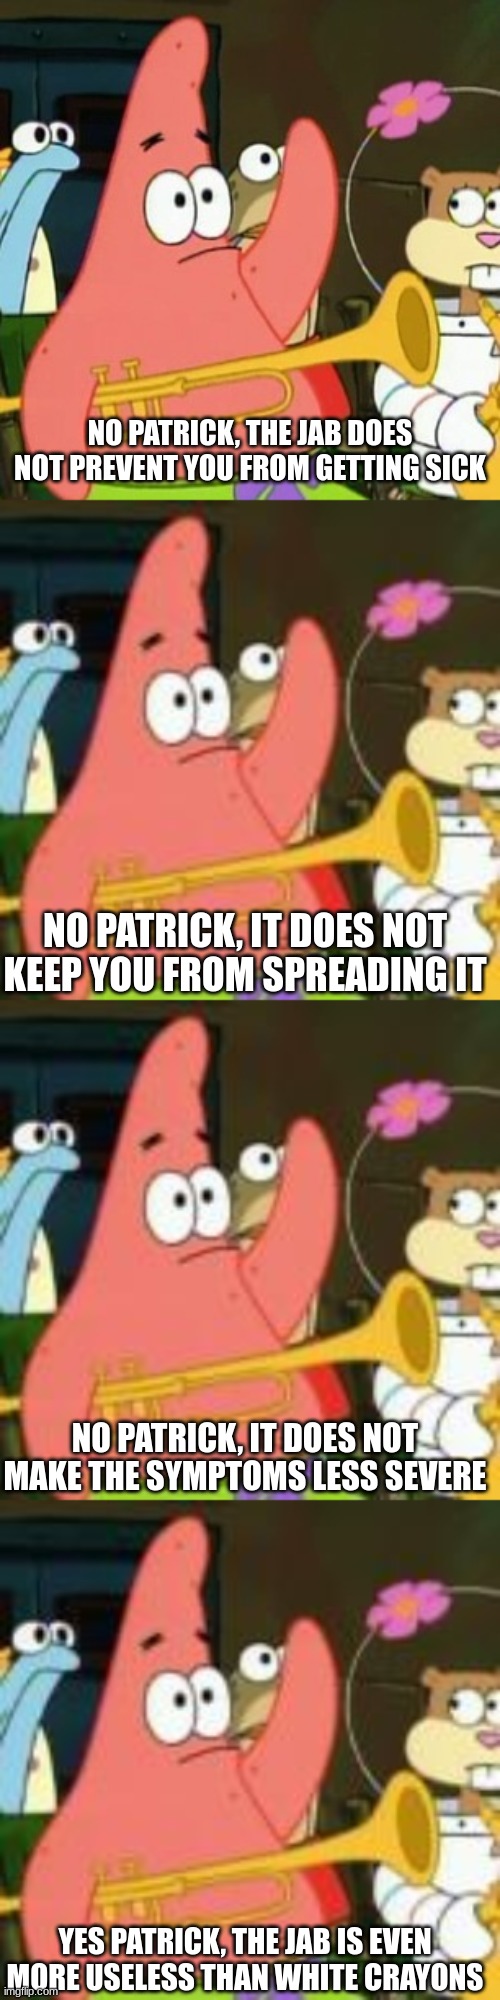 NO PATRICK, THE JAB DOES NOT PREVENT YOU FROM GETTING SICK; NO PATRICK, IT DOES NOT KEEP YOU FROM SPREADING IT; NO PATRICK, IT DOES NOT MAKE THE SYMPTOMS LESS SEVERE; YES PATRICK, THE JAB IS EVEN MORE USELESS THAN WHITE CRAYONS | image tagged in memes,no patrick,jab,covid vaccine | made w/ Imgflip meme maker